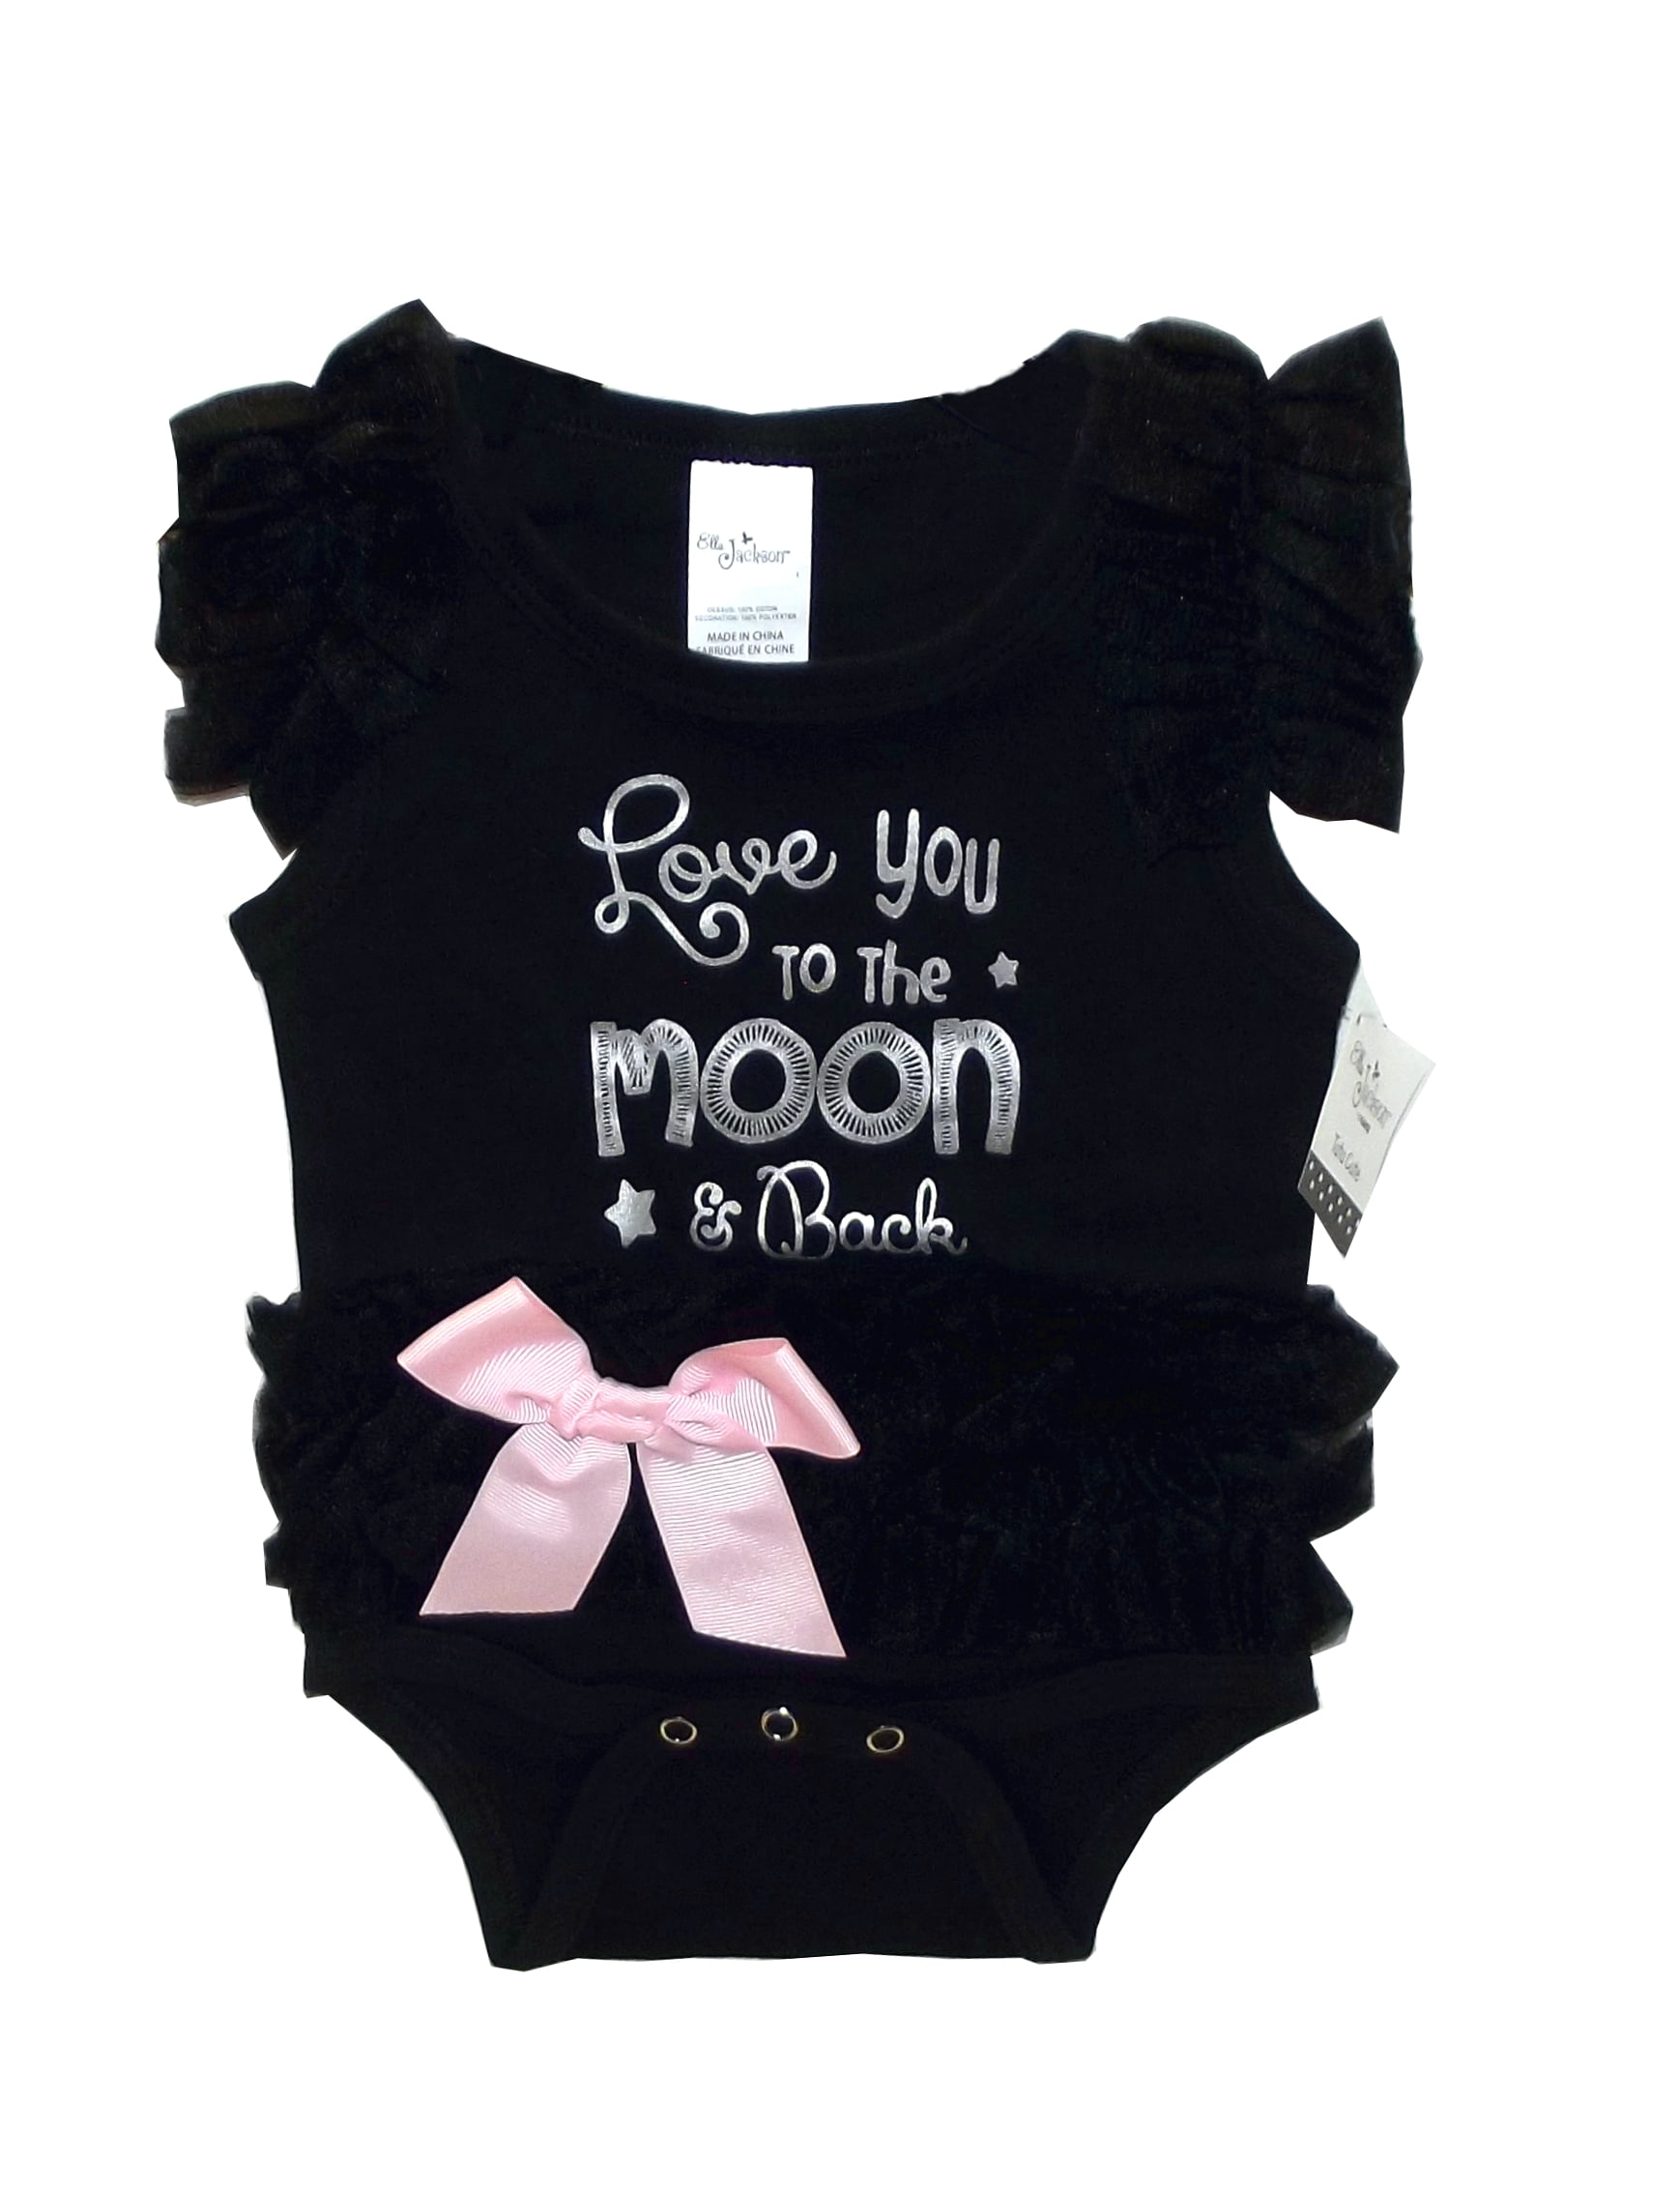 Stars Bodysuit Night sky Baby clothes Unique Baby bodysuit Cute baby clothes I Love You Love You to the Moon and Back